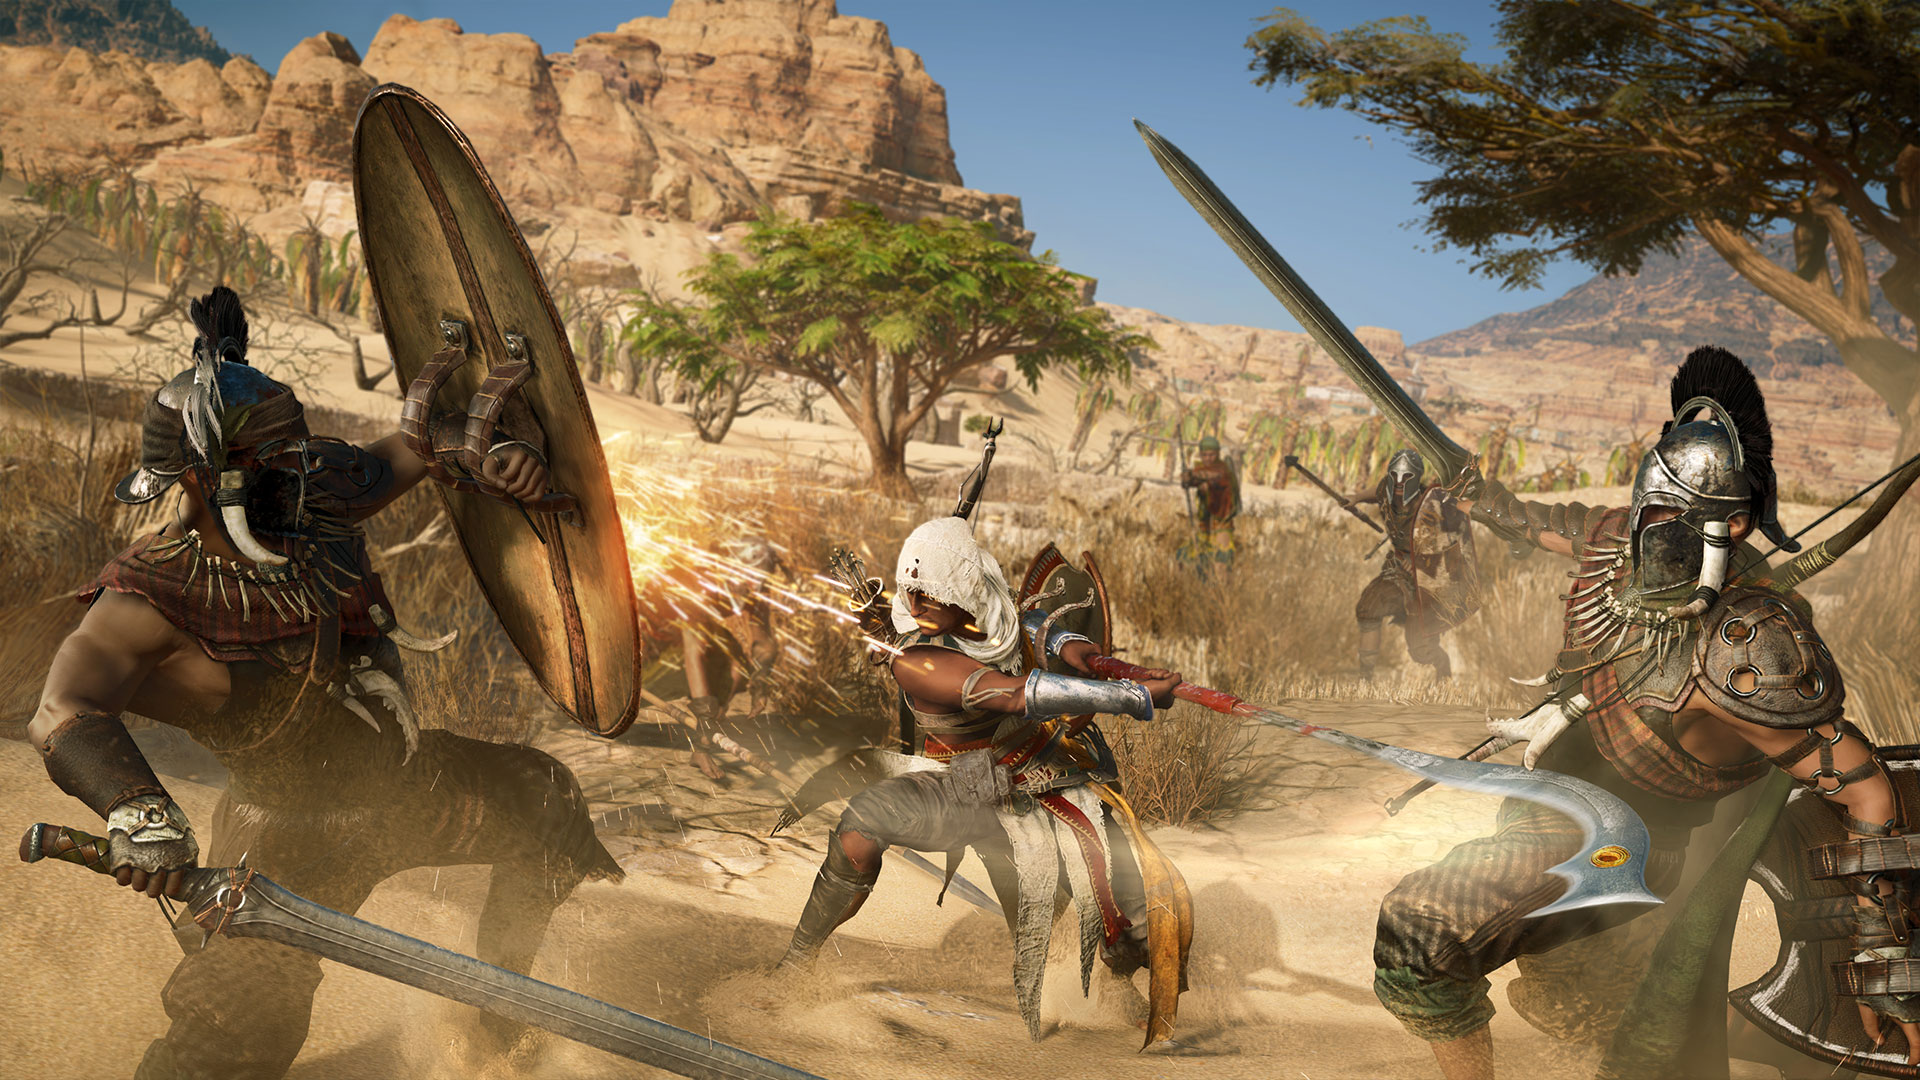 Media asset in full size related to 3dfxzone.it news item entitled as follows: Gameplay trailer in 4K e screenshots in Full HD di Assassin's Creed Origins | Image Name: news26543_Assassin-s-Creed-Origins-Screenshot_5.jpg